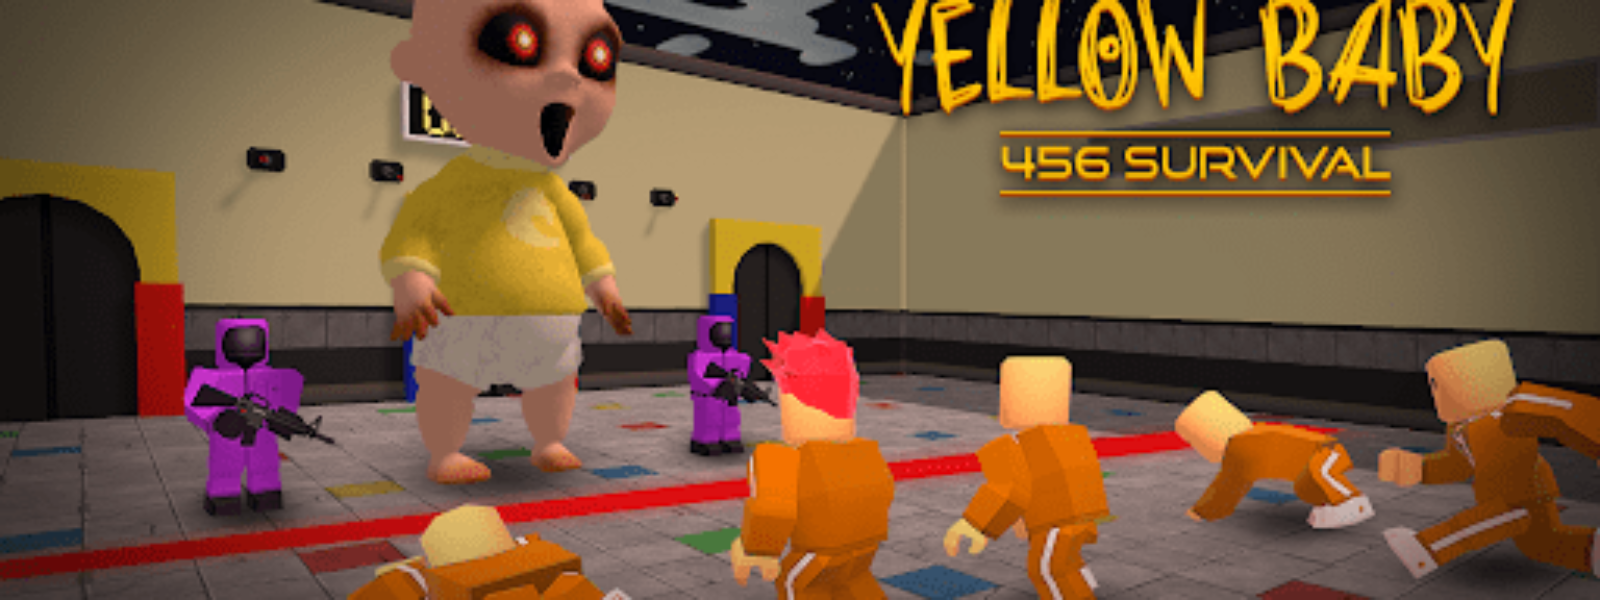 Yellow Baby: 456 Survival Game pentru Android | iOS